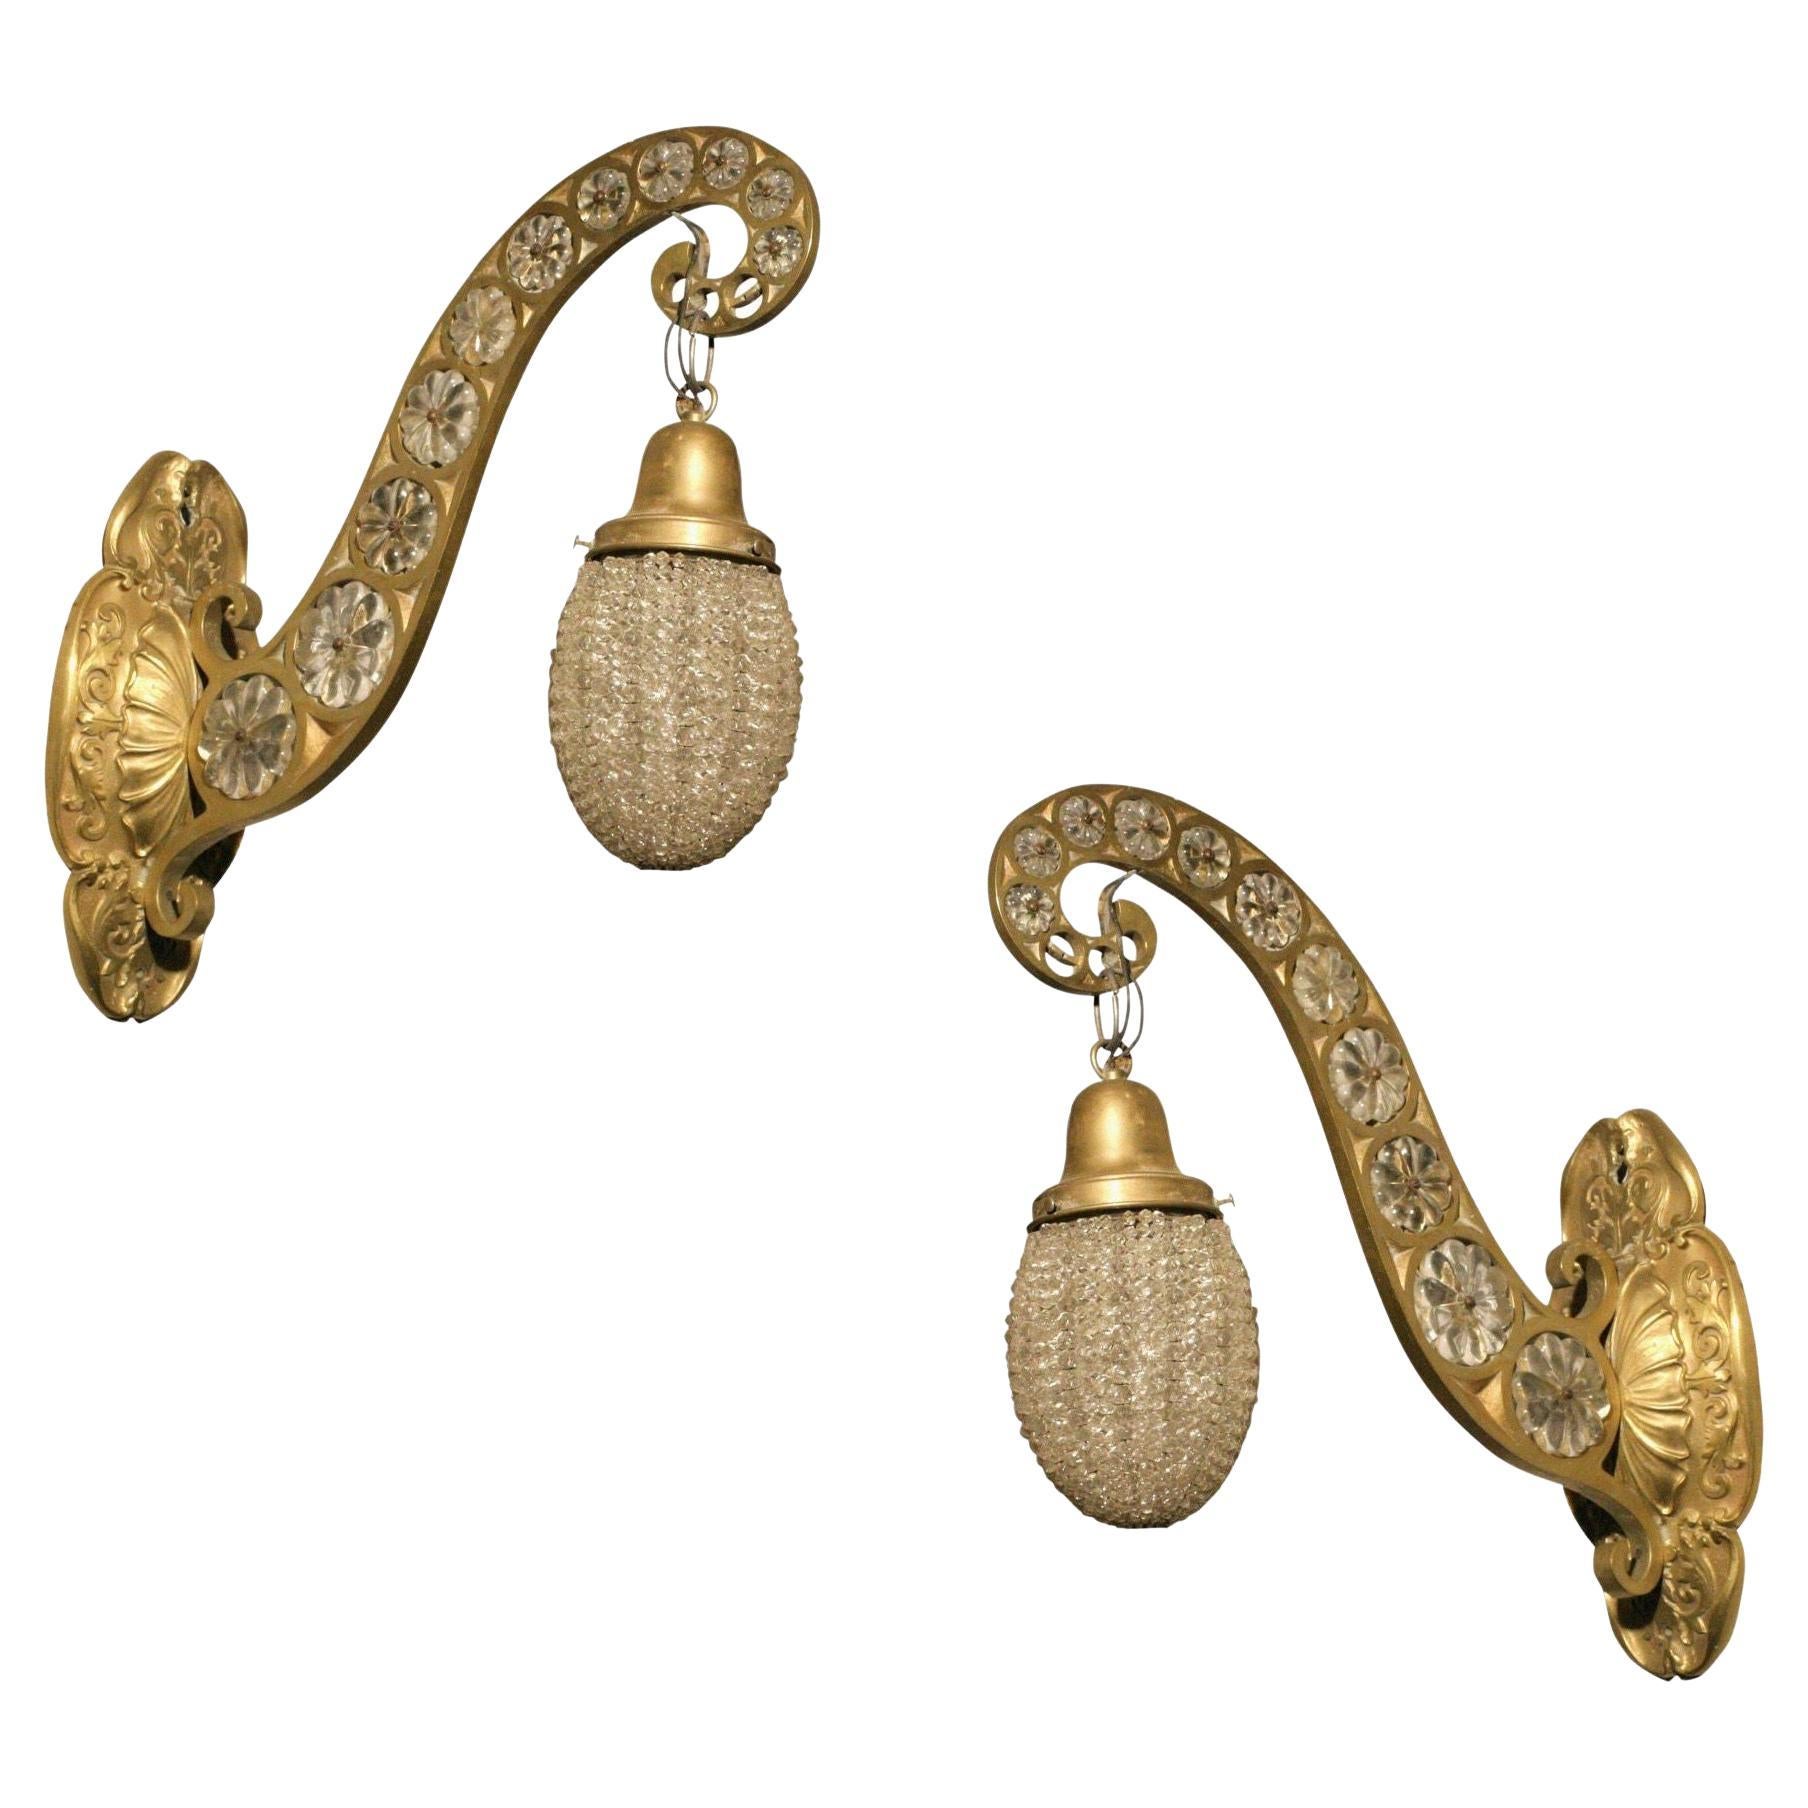 Hollywood Regency Brass and Crystal Beaded Sconce, Pair